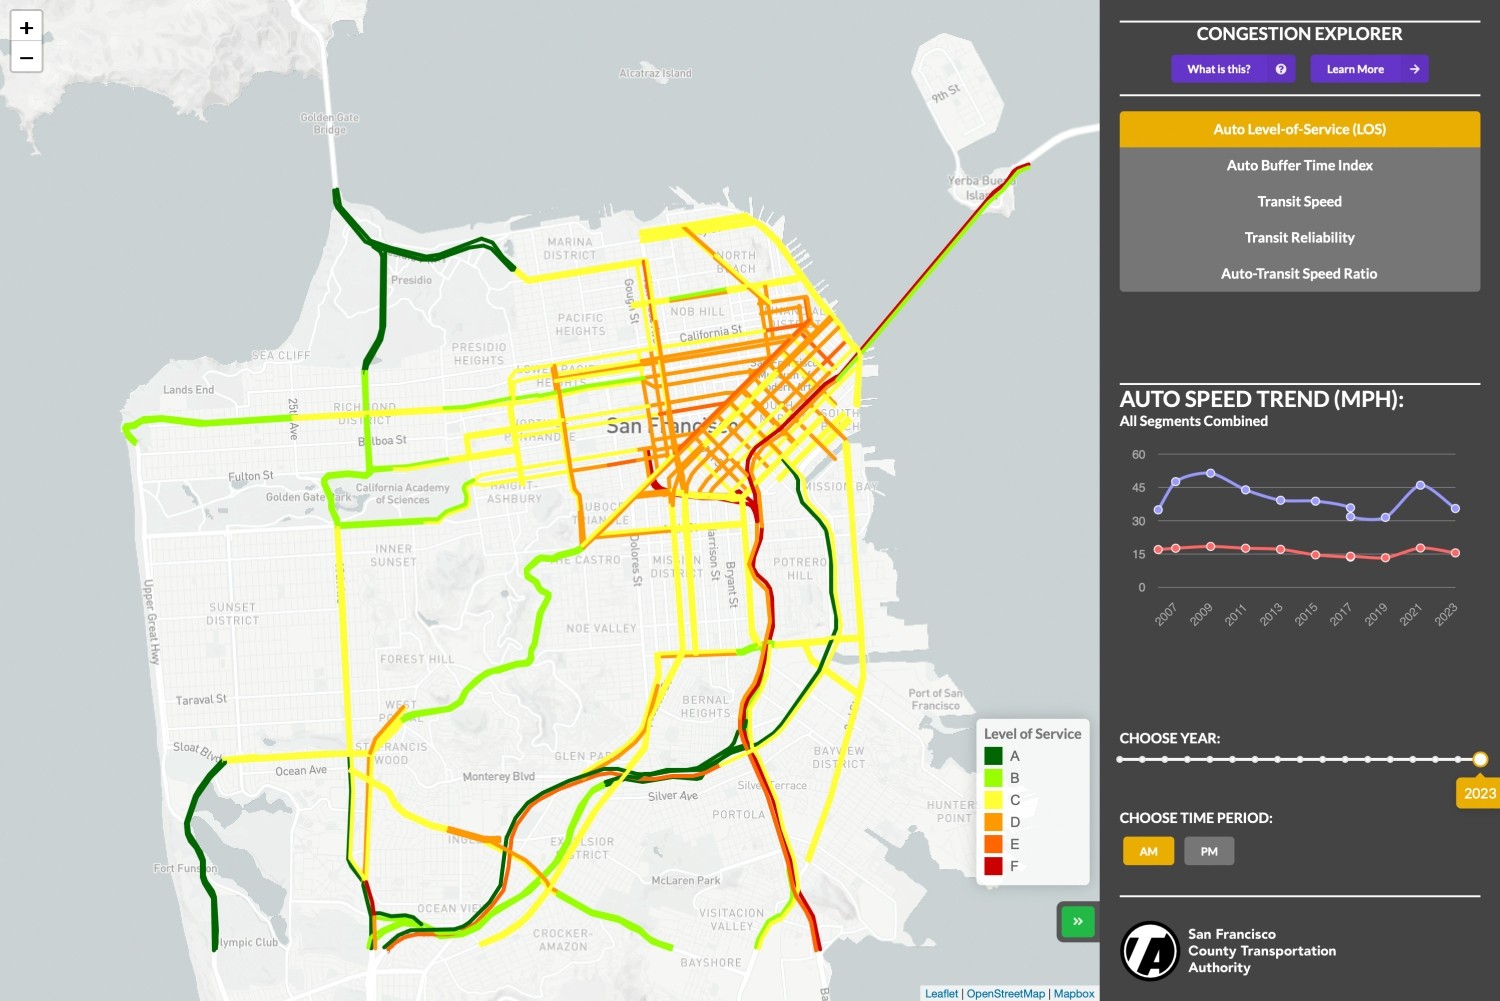 A screenshot of the interactive congestion map tool